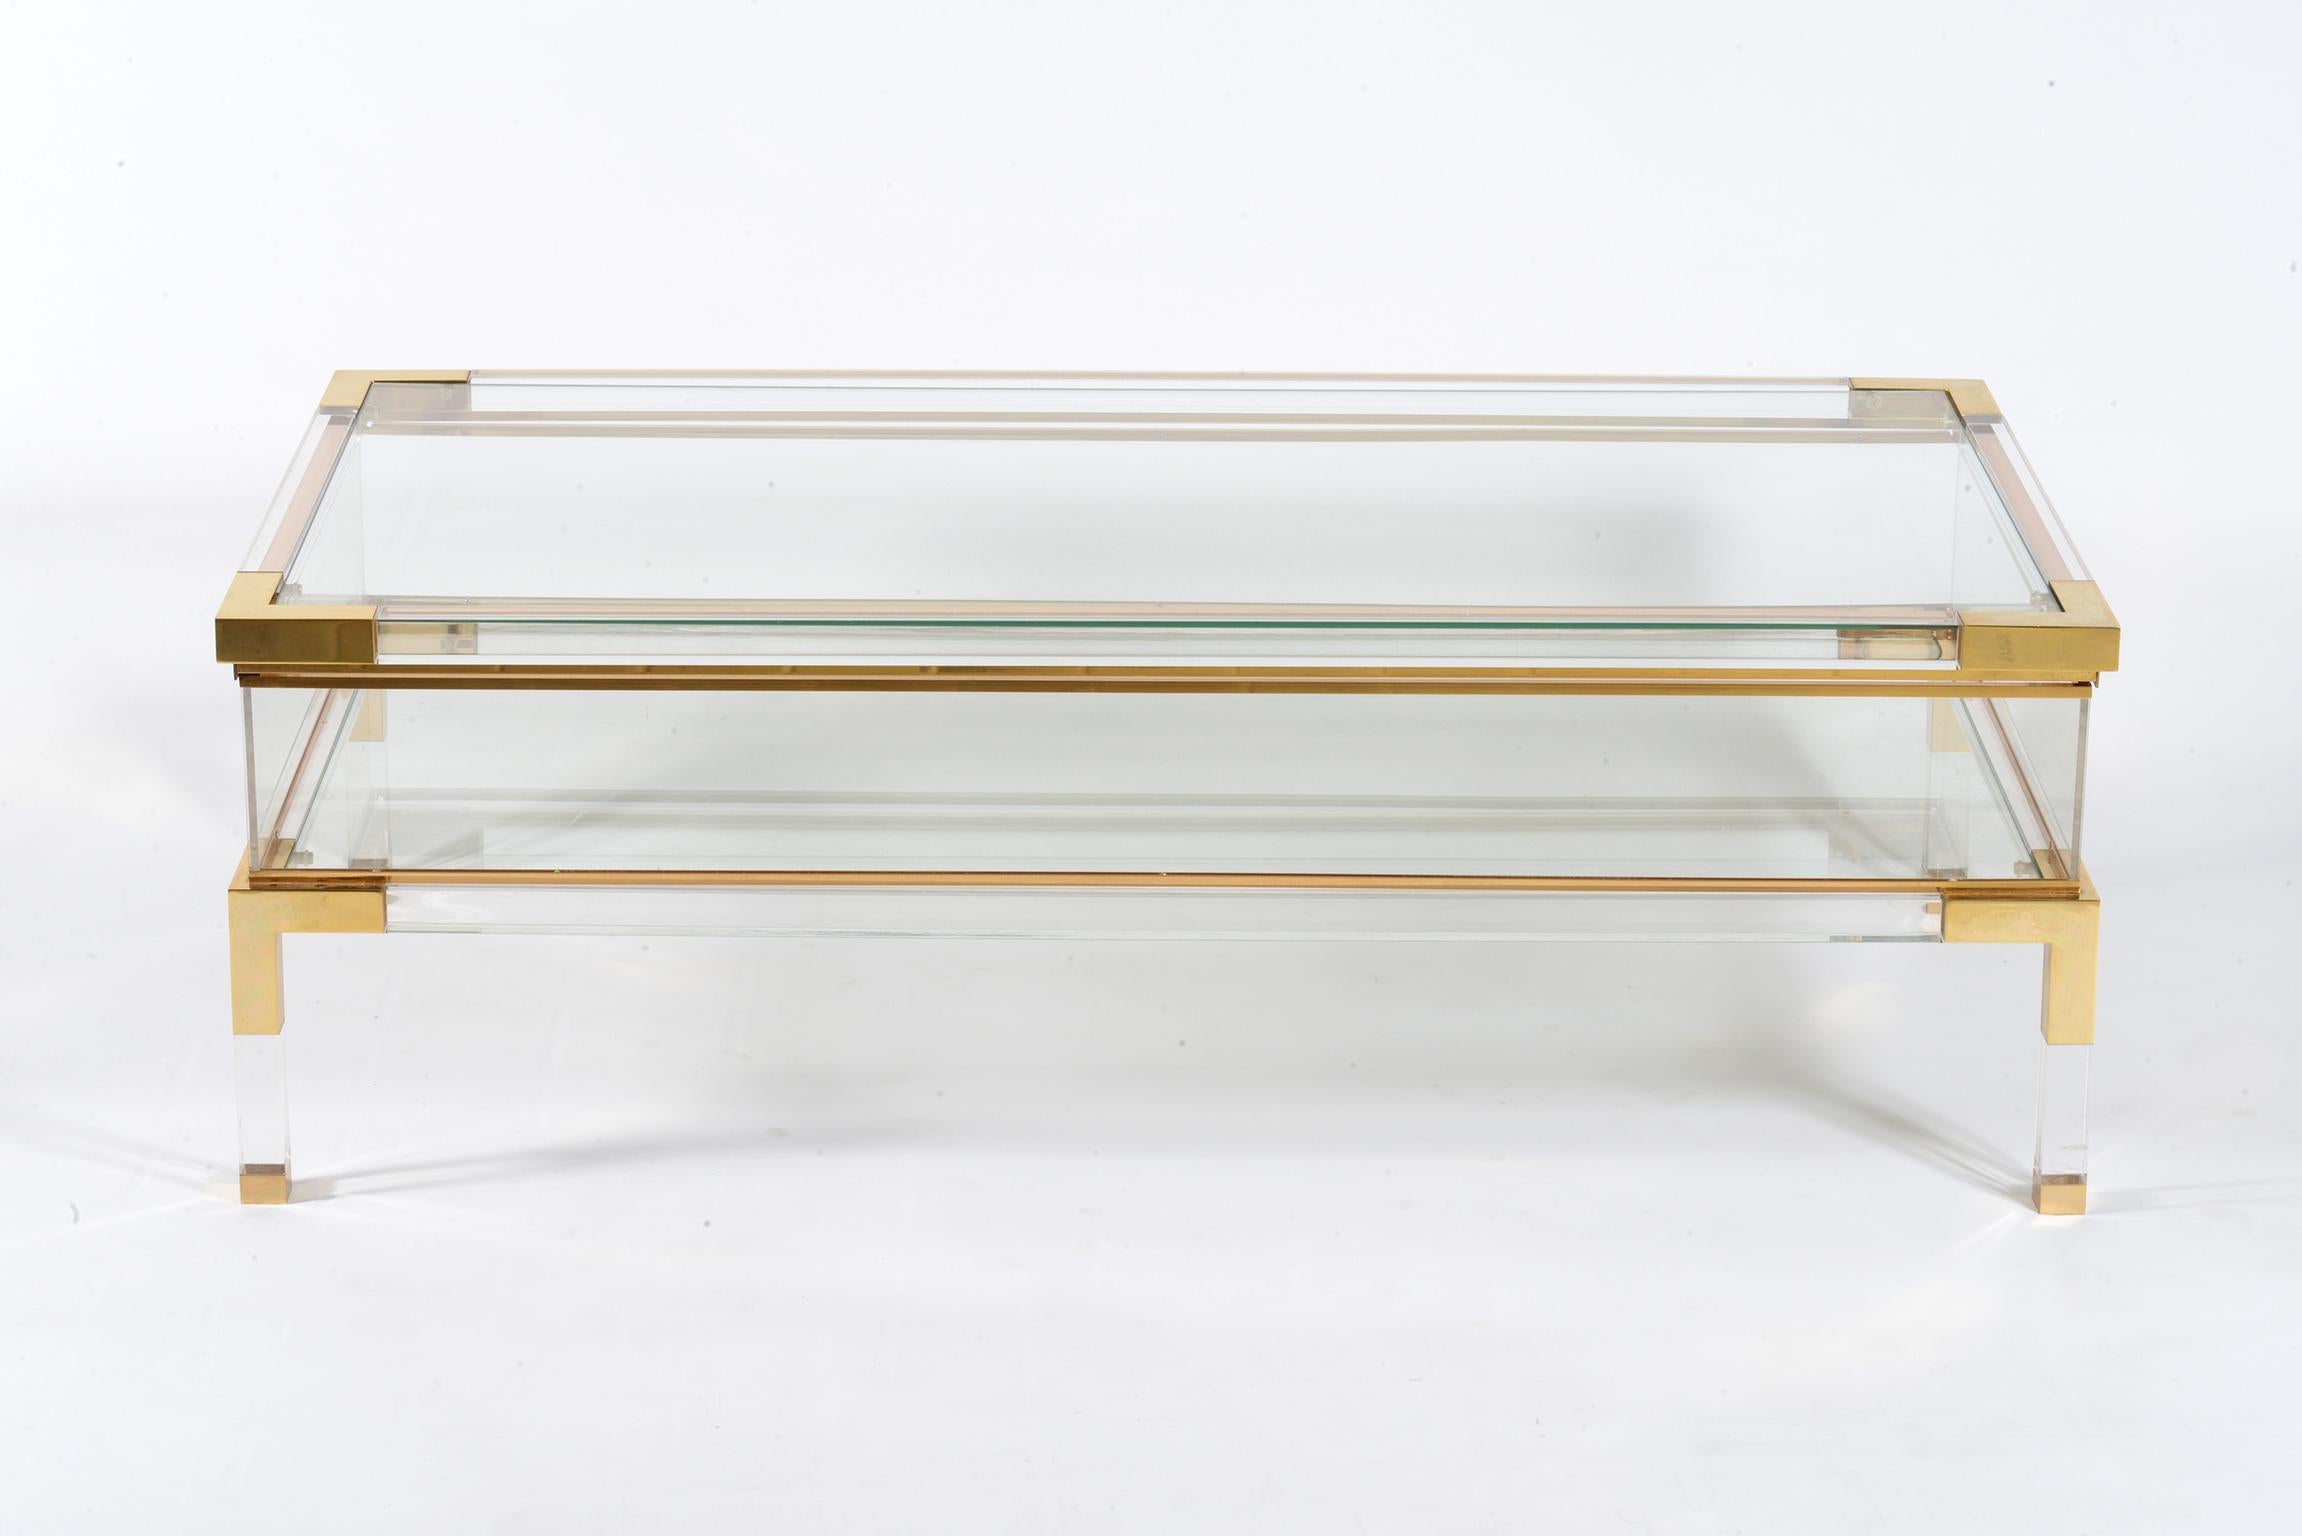 Rectangular coffee sofa table in polished brass, Lucite and glass with storage compartment, the top runs like a sliding door and allows you to put objects, magazine, books inside.
Italy, Mid-Century Modern, 1970.